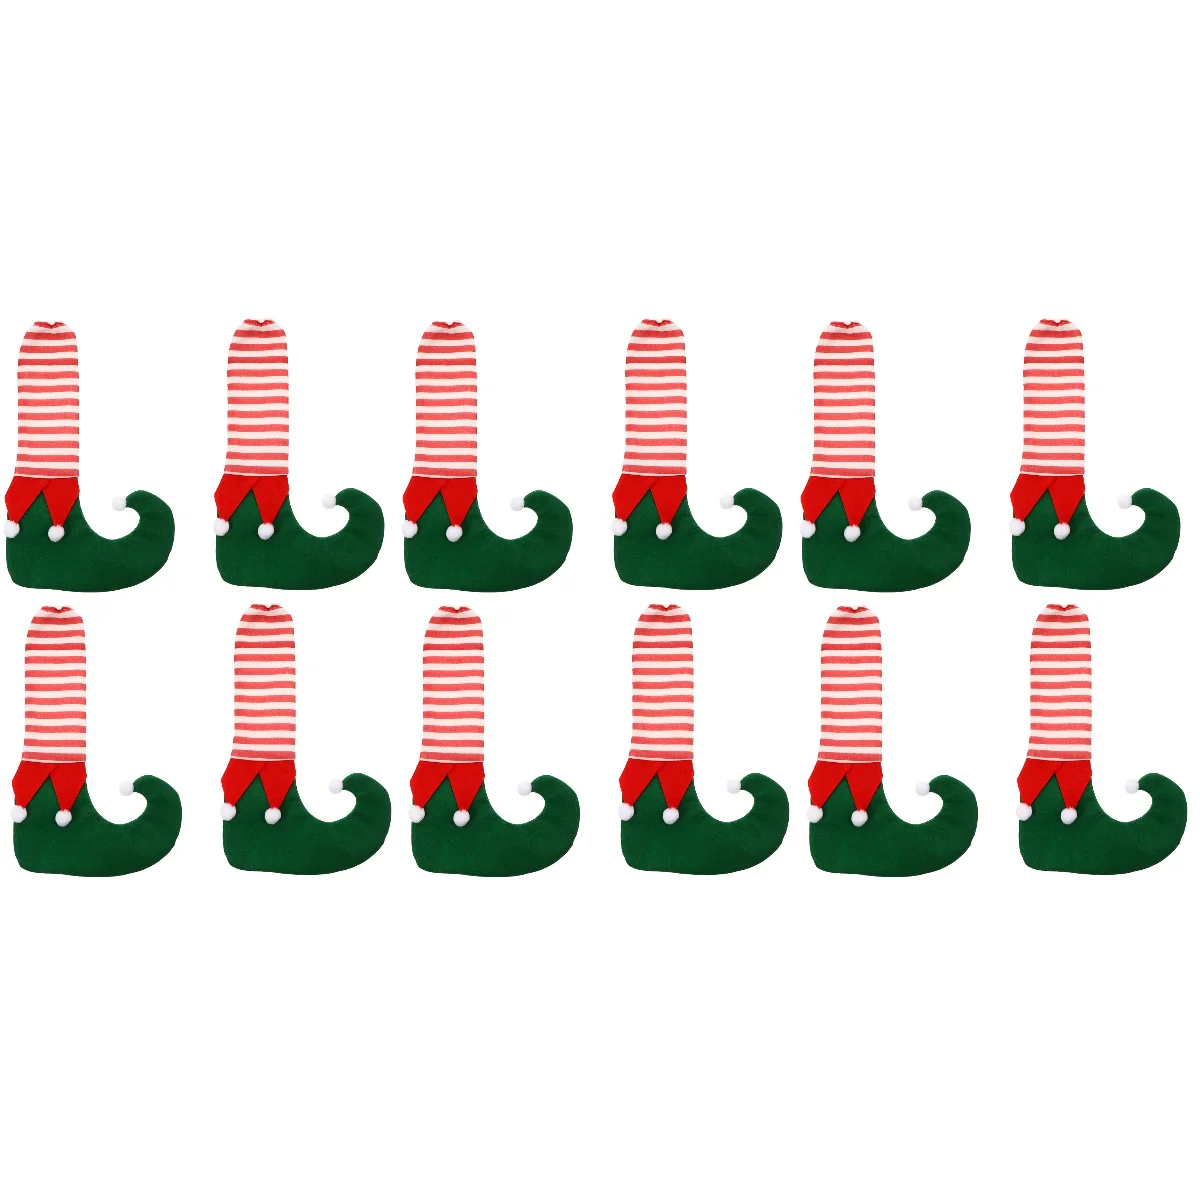 

Chair Leg Christmas Cover Furniture Caps Socks Decoration Holiday Desk Set Covers Feet Booties Elf Table Sleeves Shoes Slipper